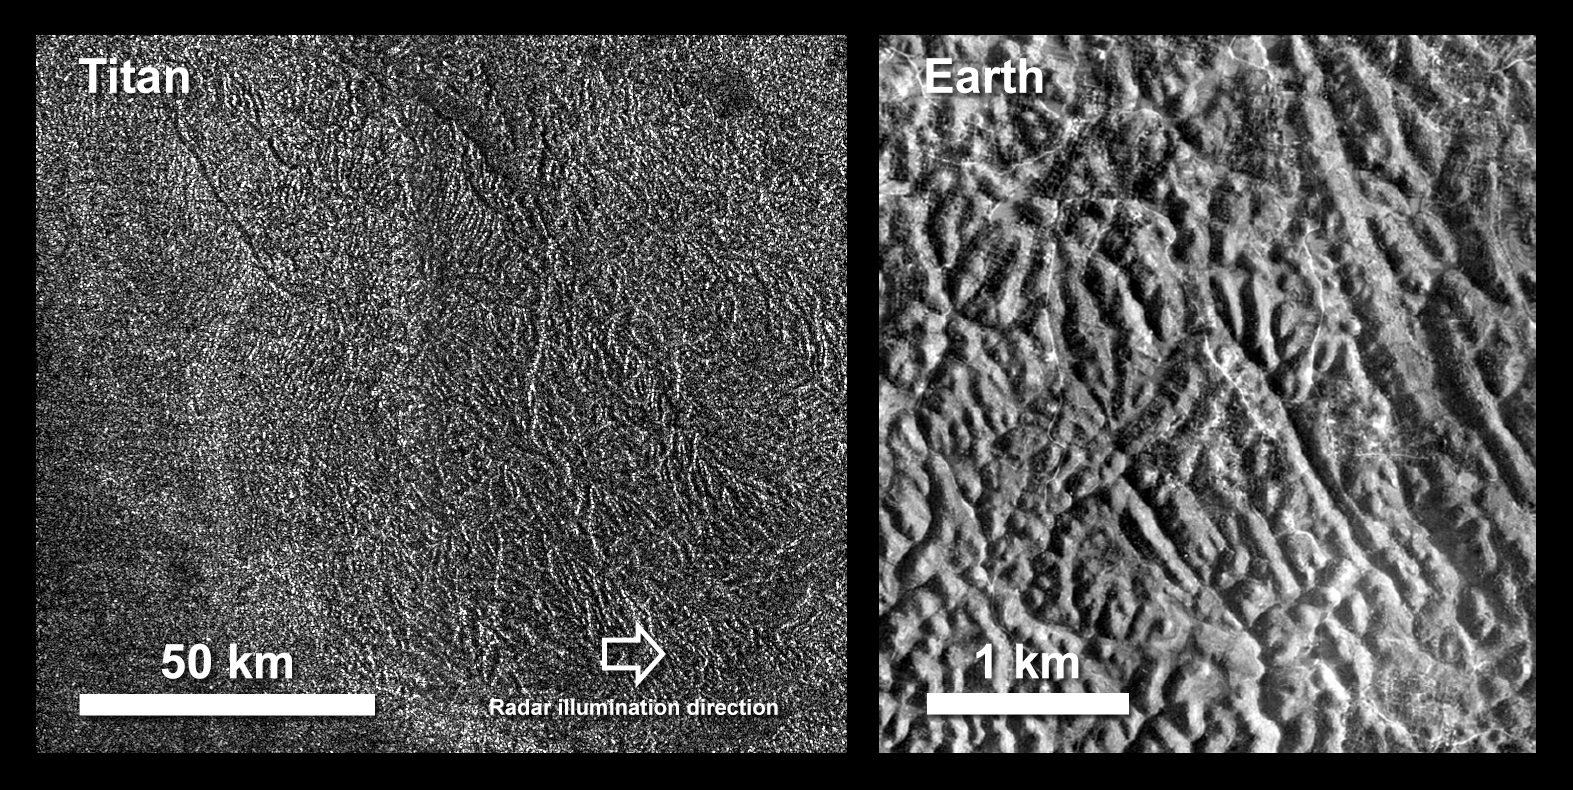 Black and white image showing terrain on Titan compared to similar terrain on Earth.